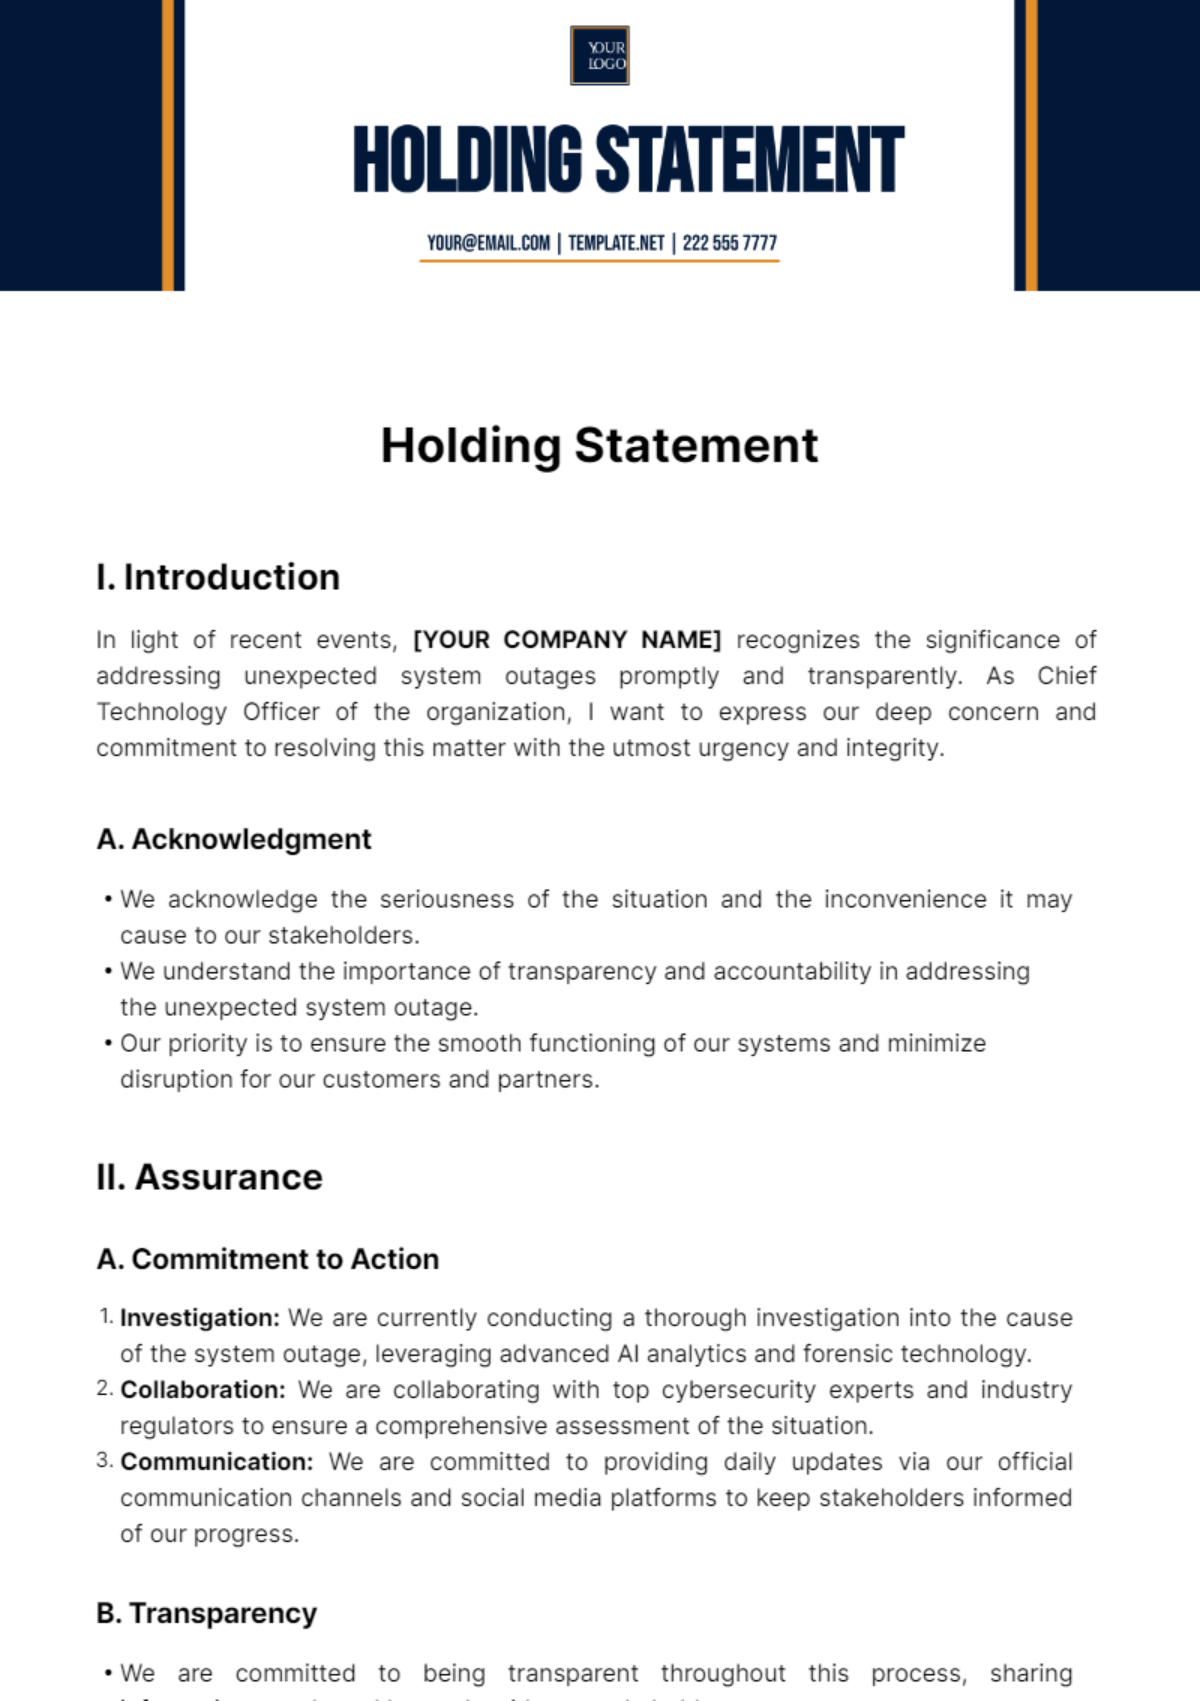 Holding Statement Template